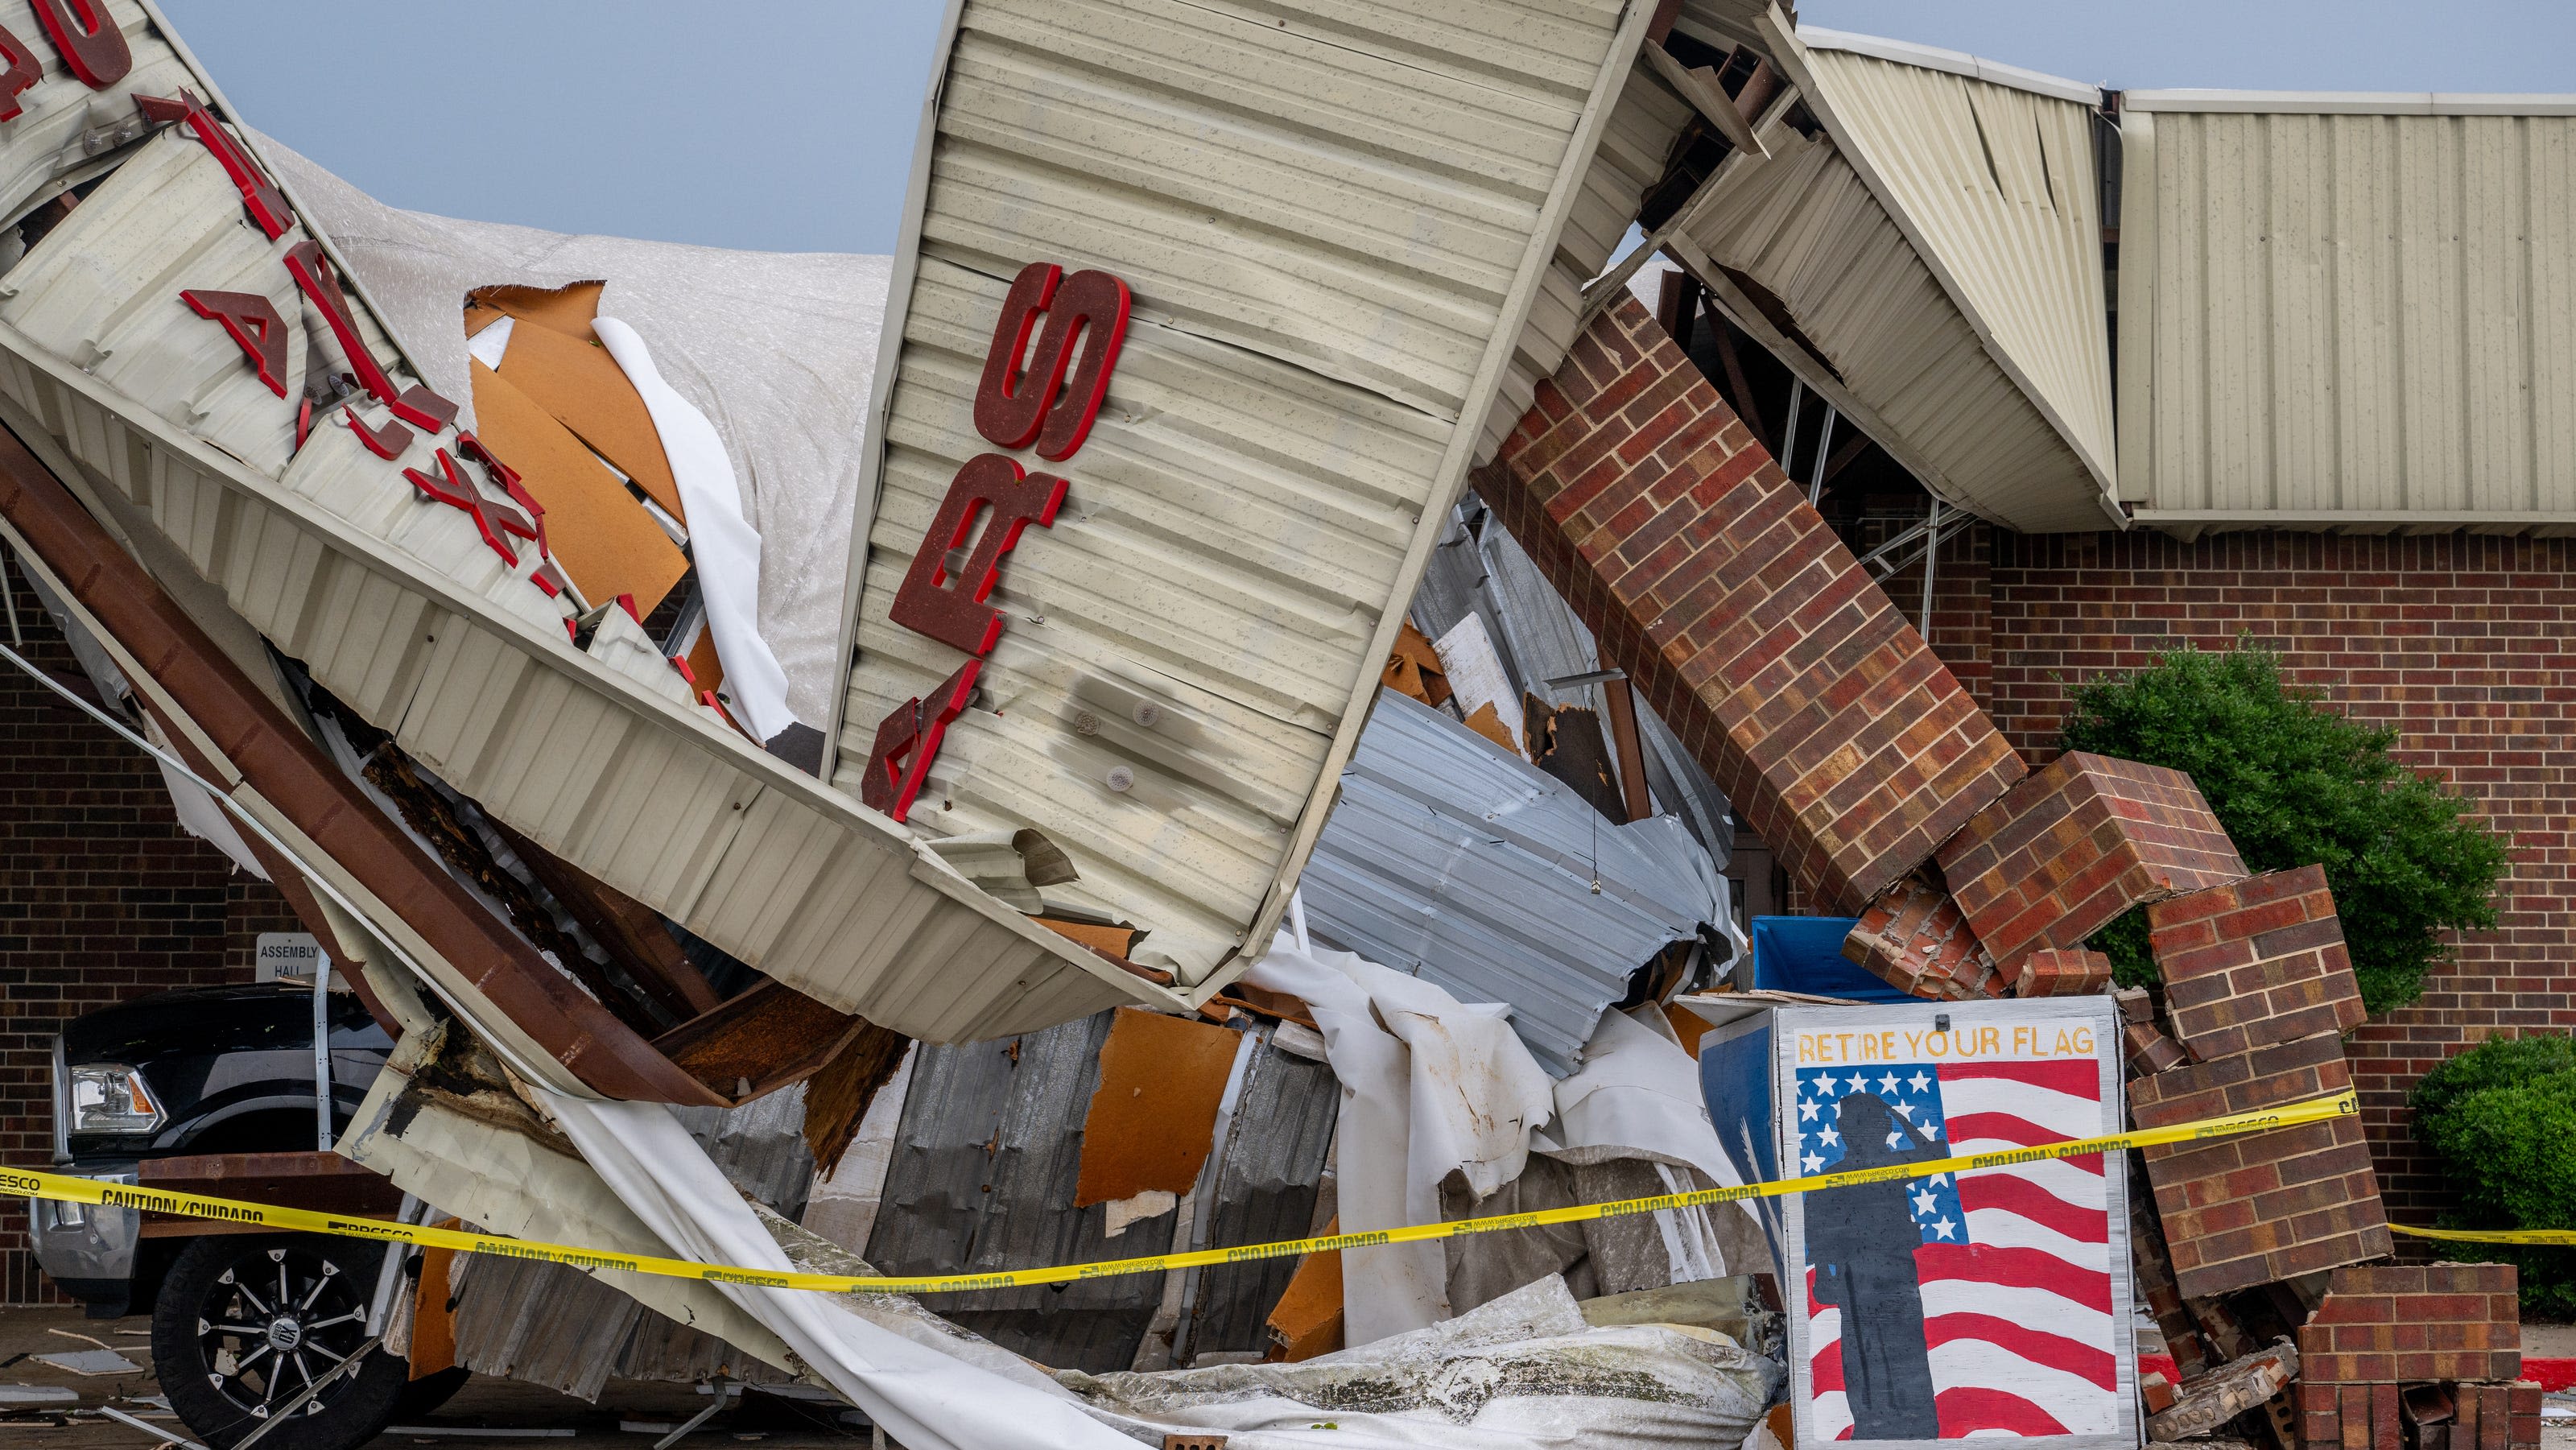 You're not imagining it: There have been a lot of tornadoes this spring. Here's why.